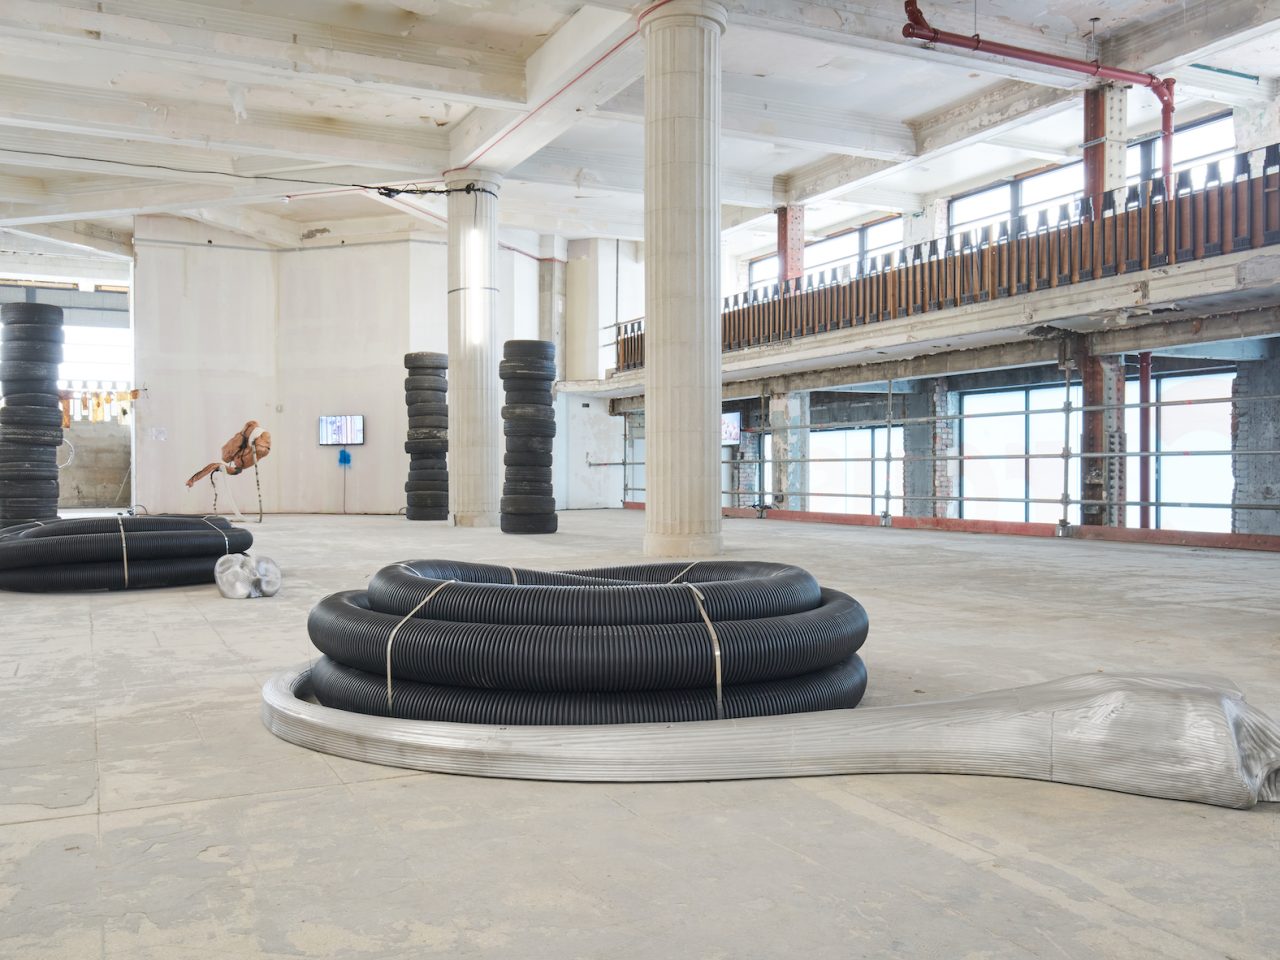 Large floor sculptures, they are long black tubes tied together to create a circular structure, underneath them is a large-scale stretched aluminium model of a human bone curving outwards.